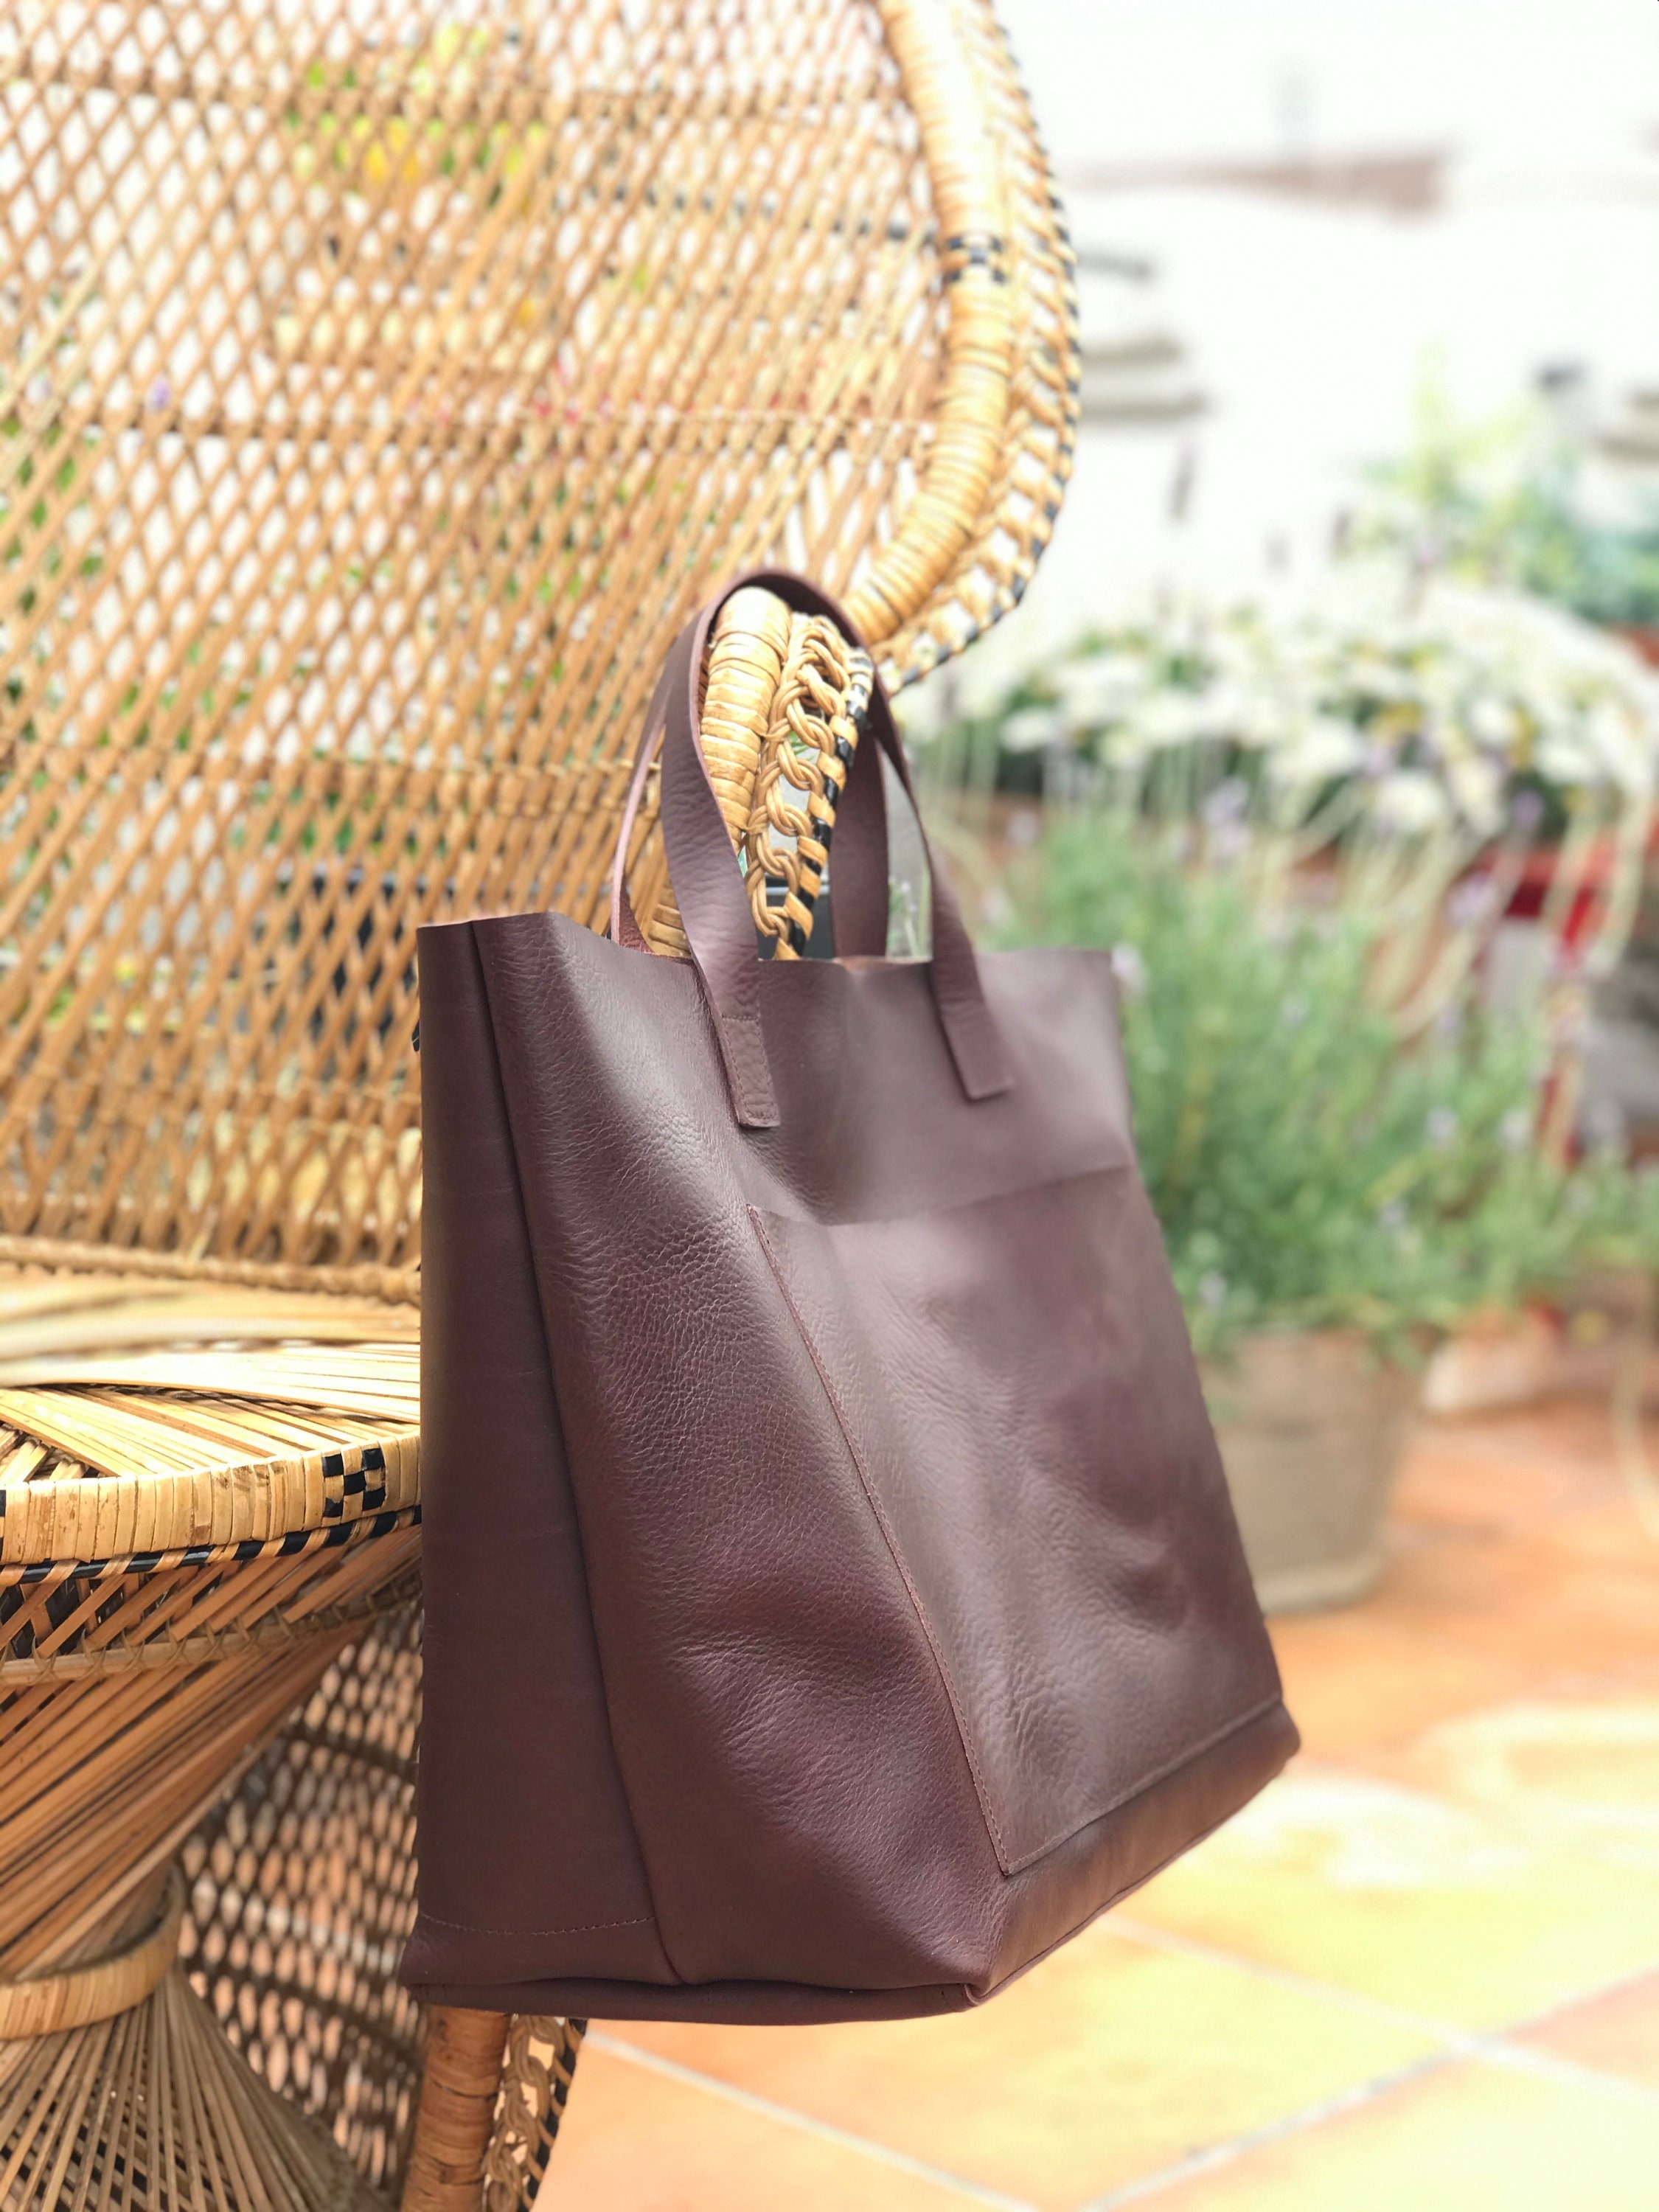 Oversized Cognac Leather tote bag with outside pockets. Cap Sa Sal